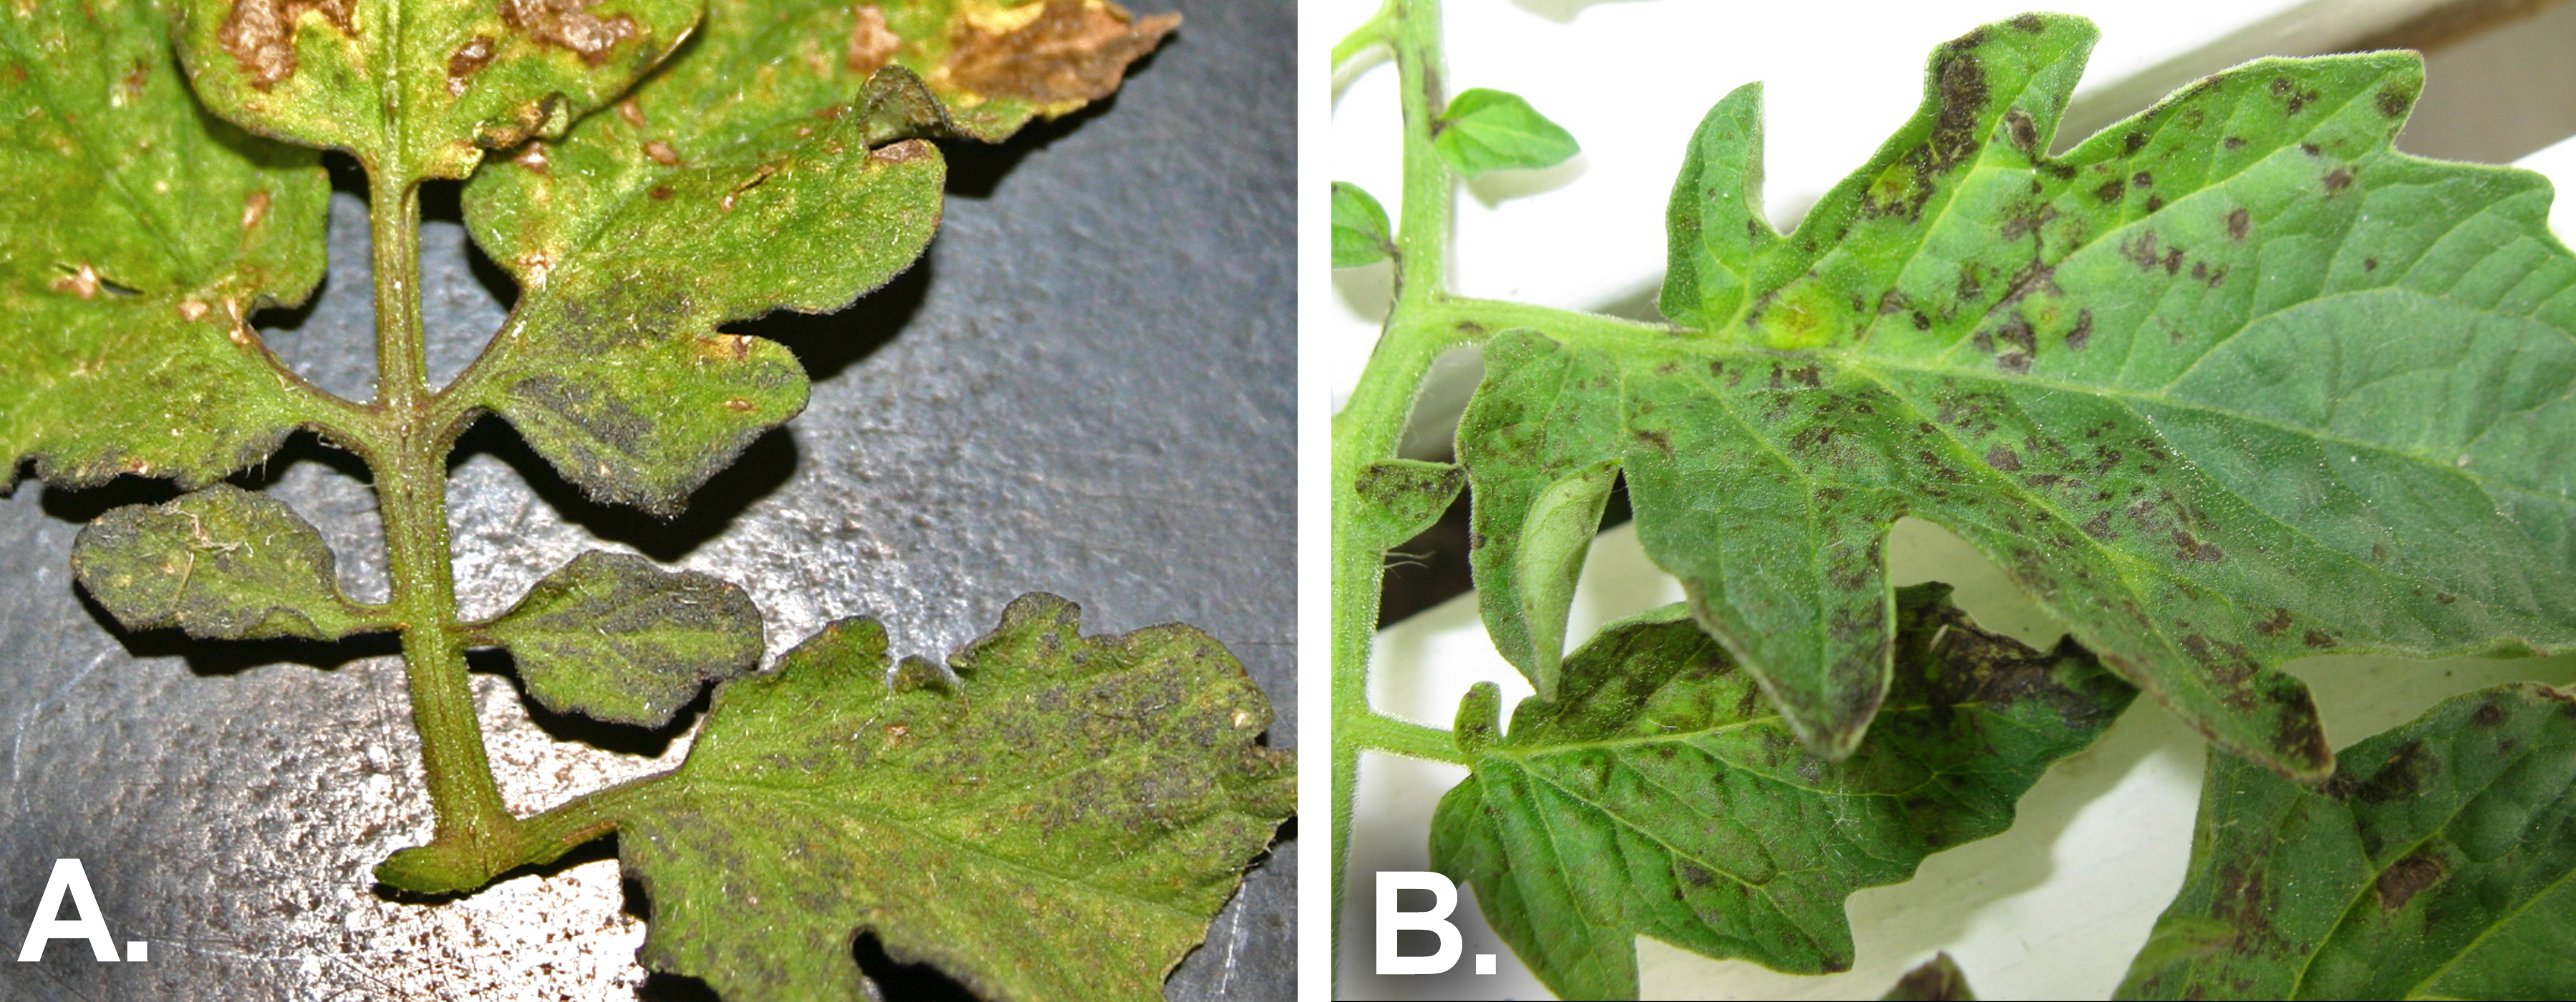 Two side-by-side pictures of tomato spotted wilt virus symptoms on leaves and stems. The left one is labeled A. The Right is labeled B.